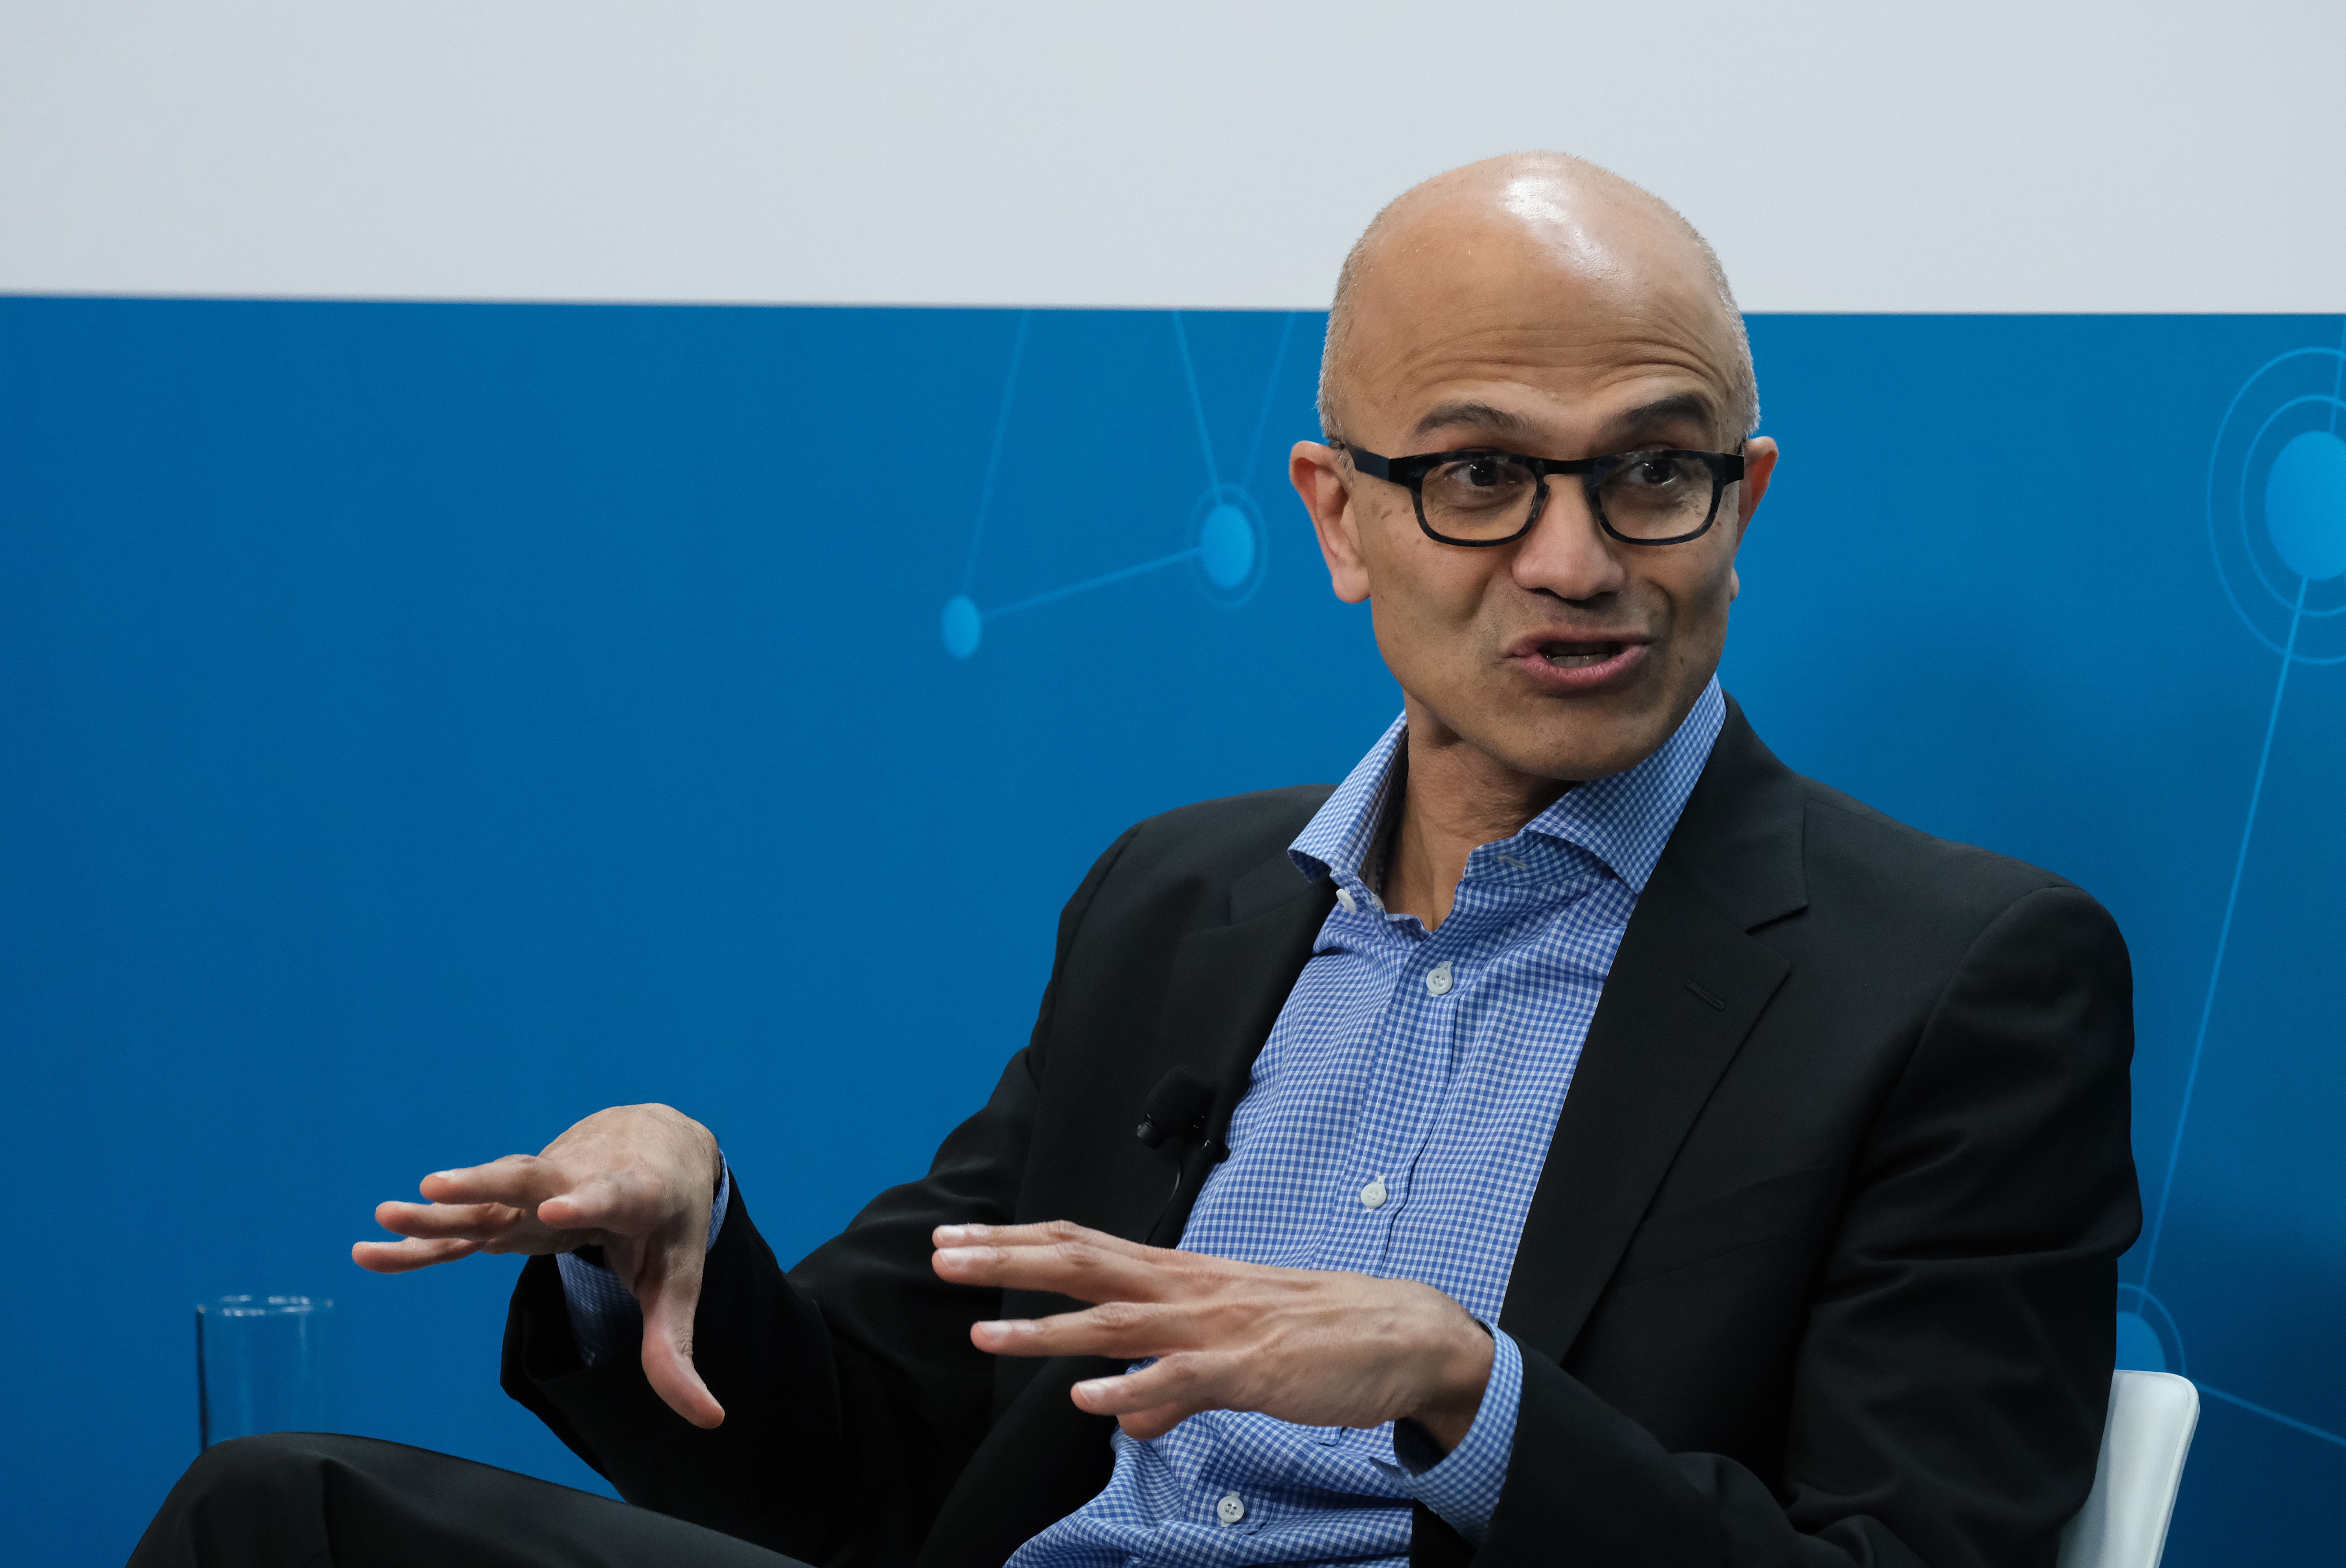 Microsoft CEO touts open approach at Build 2019 conference